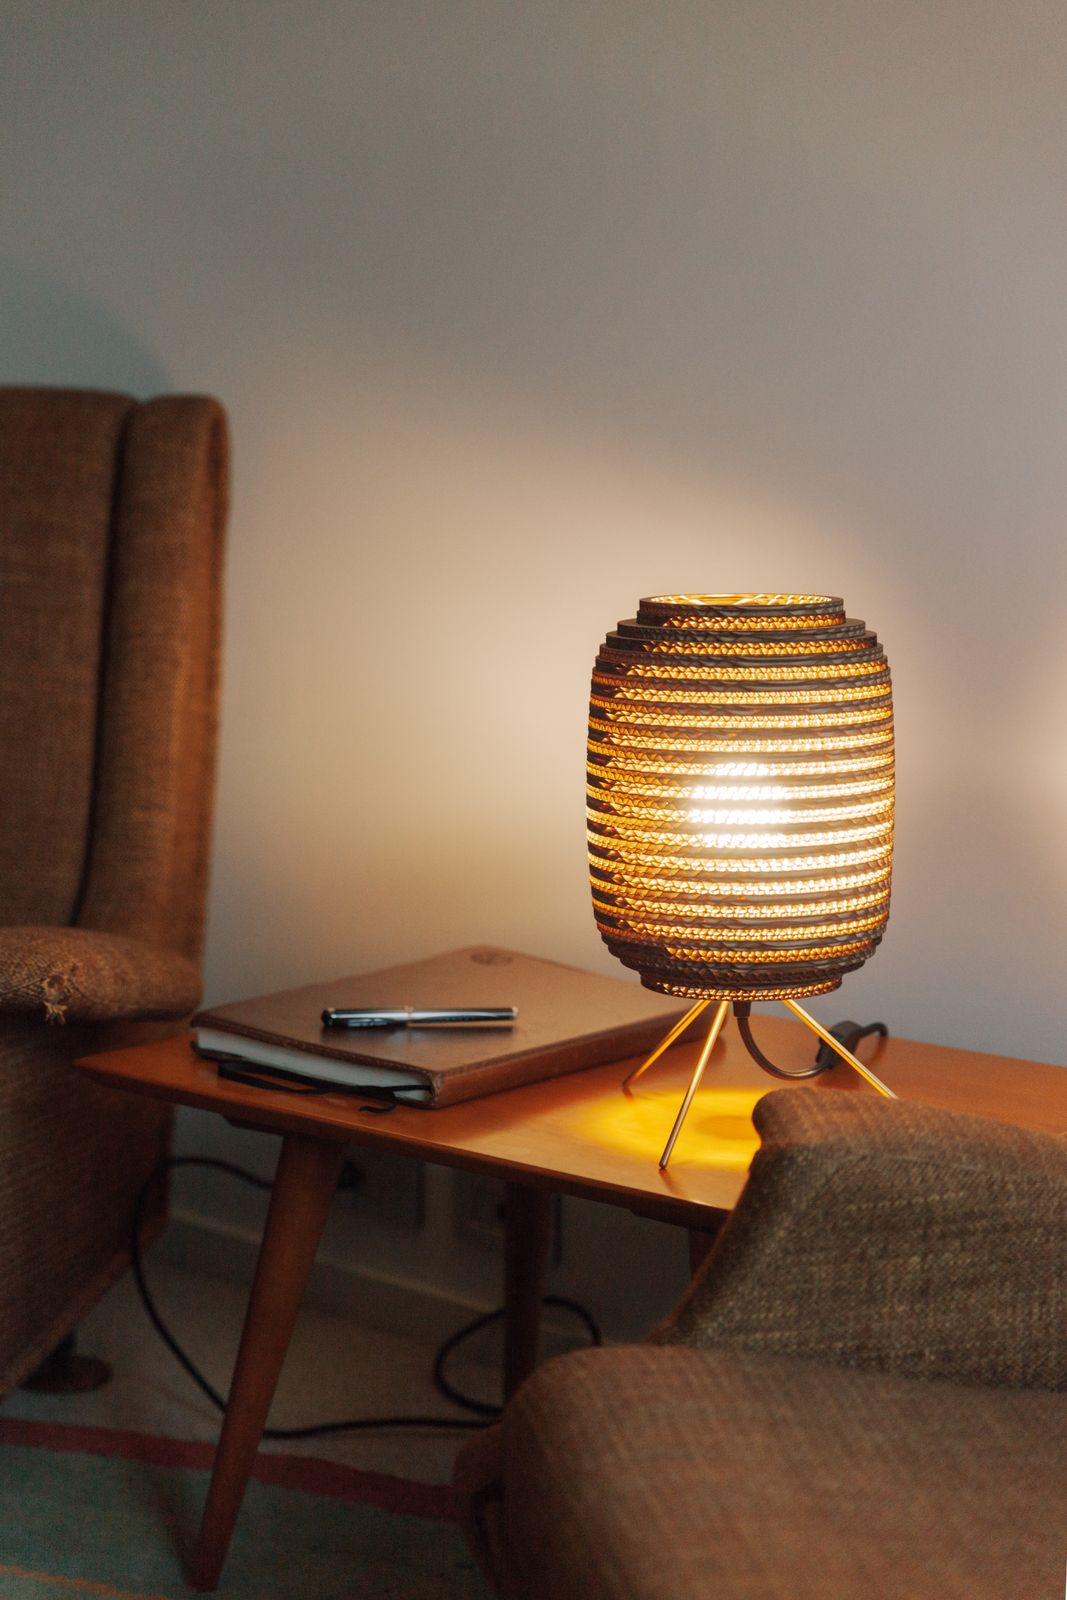 Functional Ausi Table Lamp: Ideal for Interior Decor